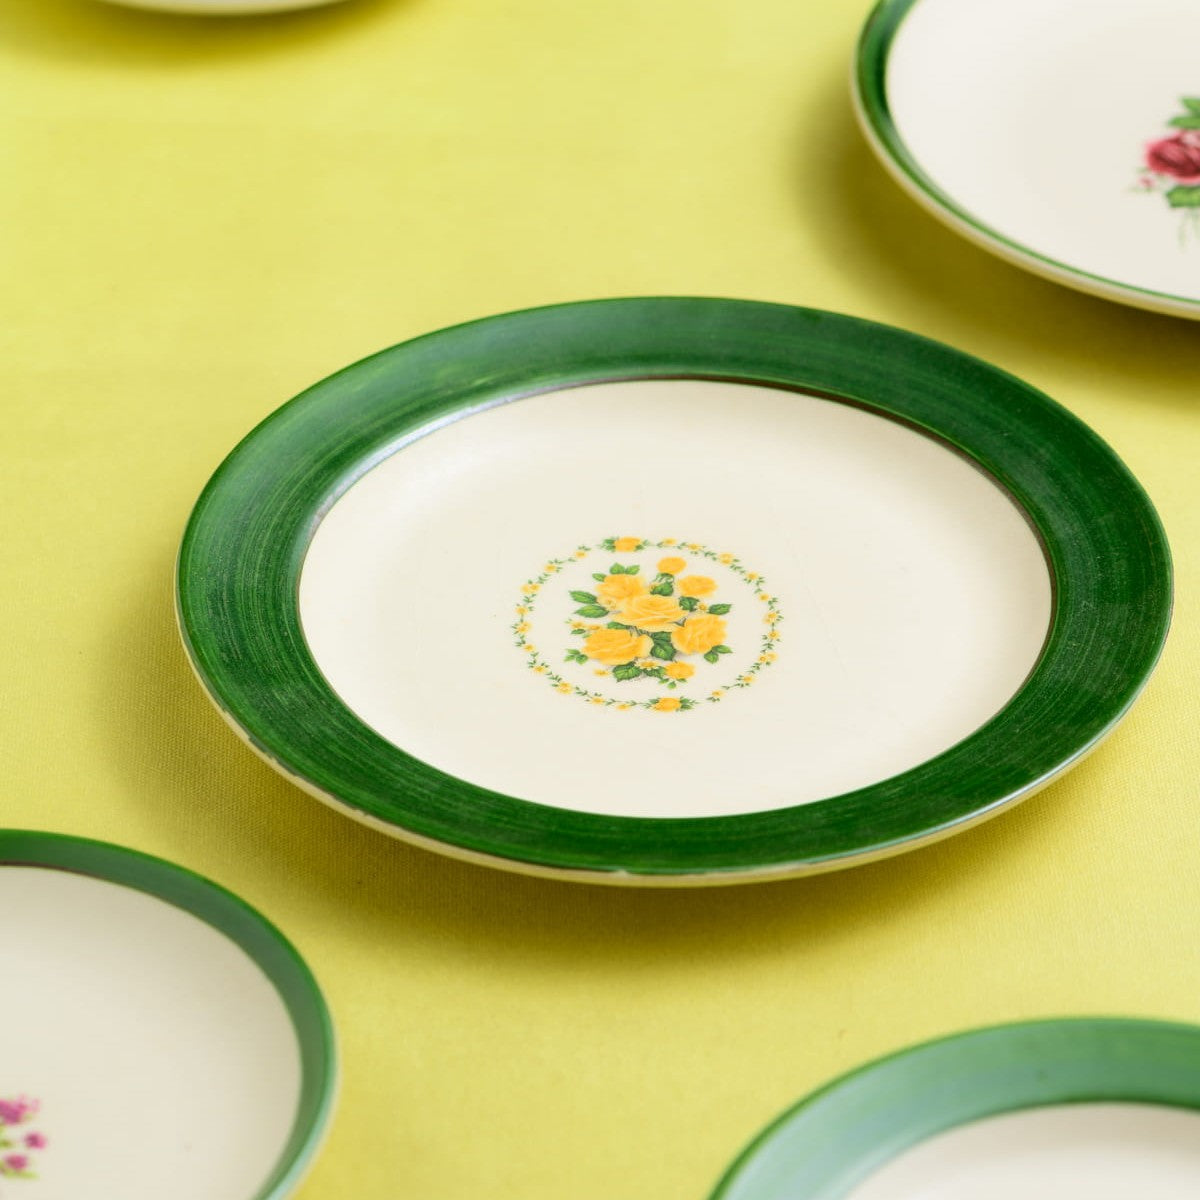 Floral Whispers in Green Wall Decor Ceramics Plate Sets